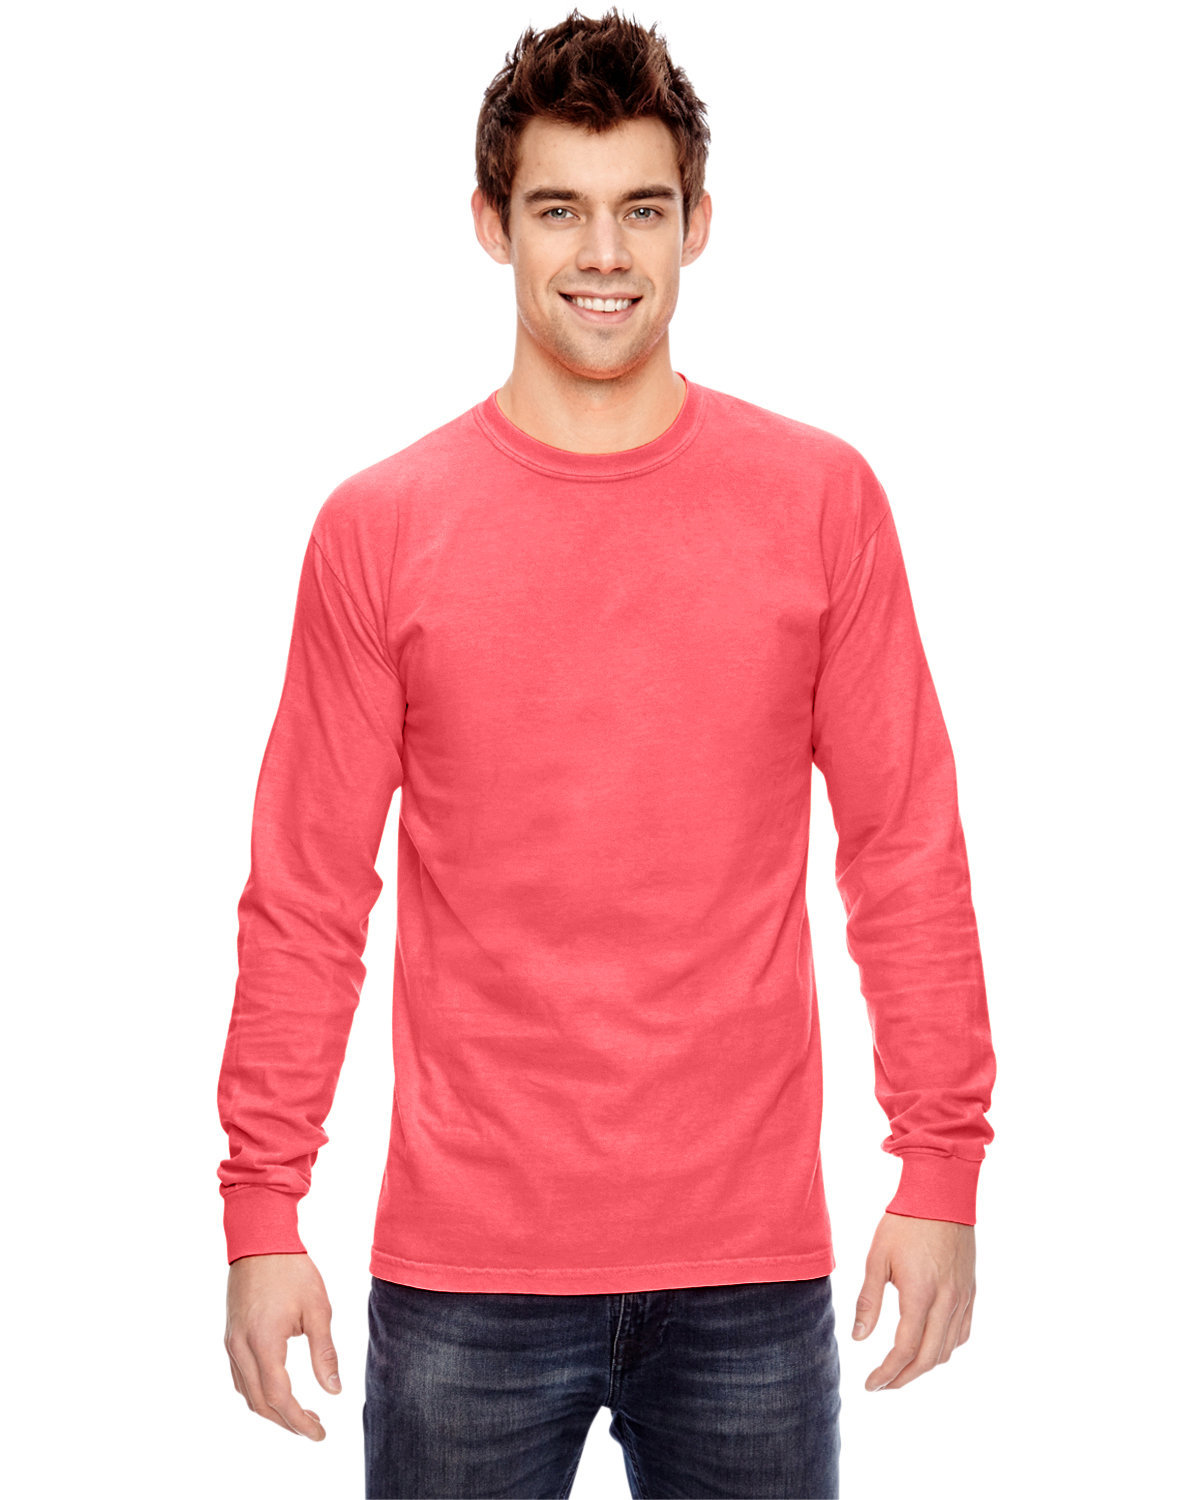 Comfort Colors Adult Heavyweight RS Long-Sleeve T-Shirt neon red orange 